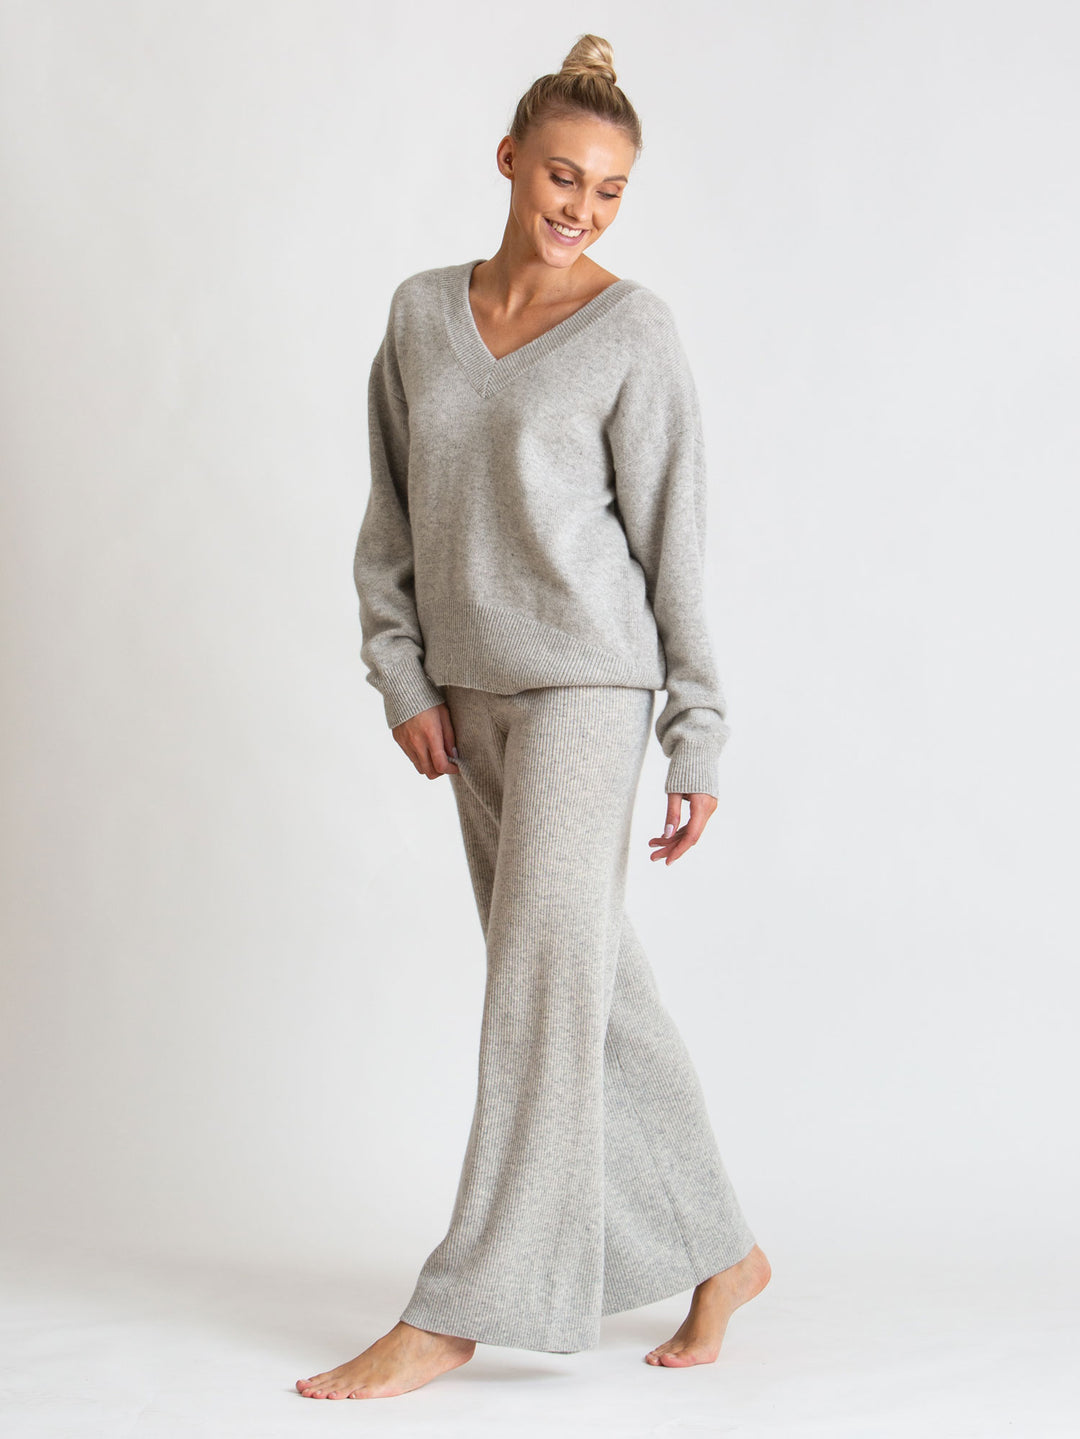 "North" cashmere pants in rib knit, 100% pure cashmere from Kashmina